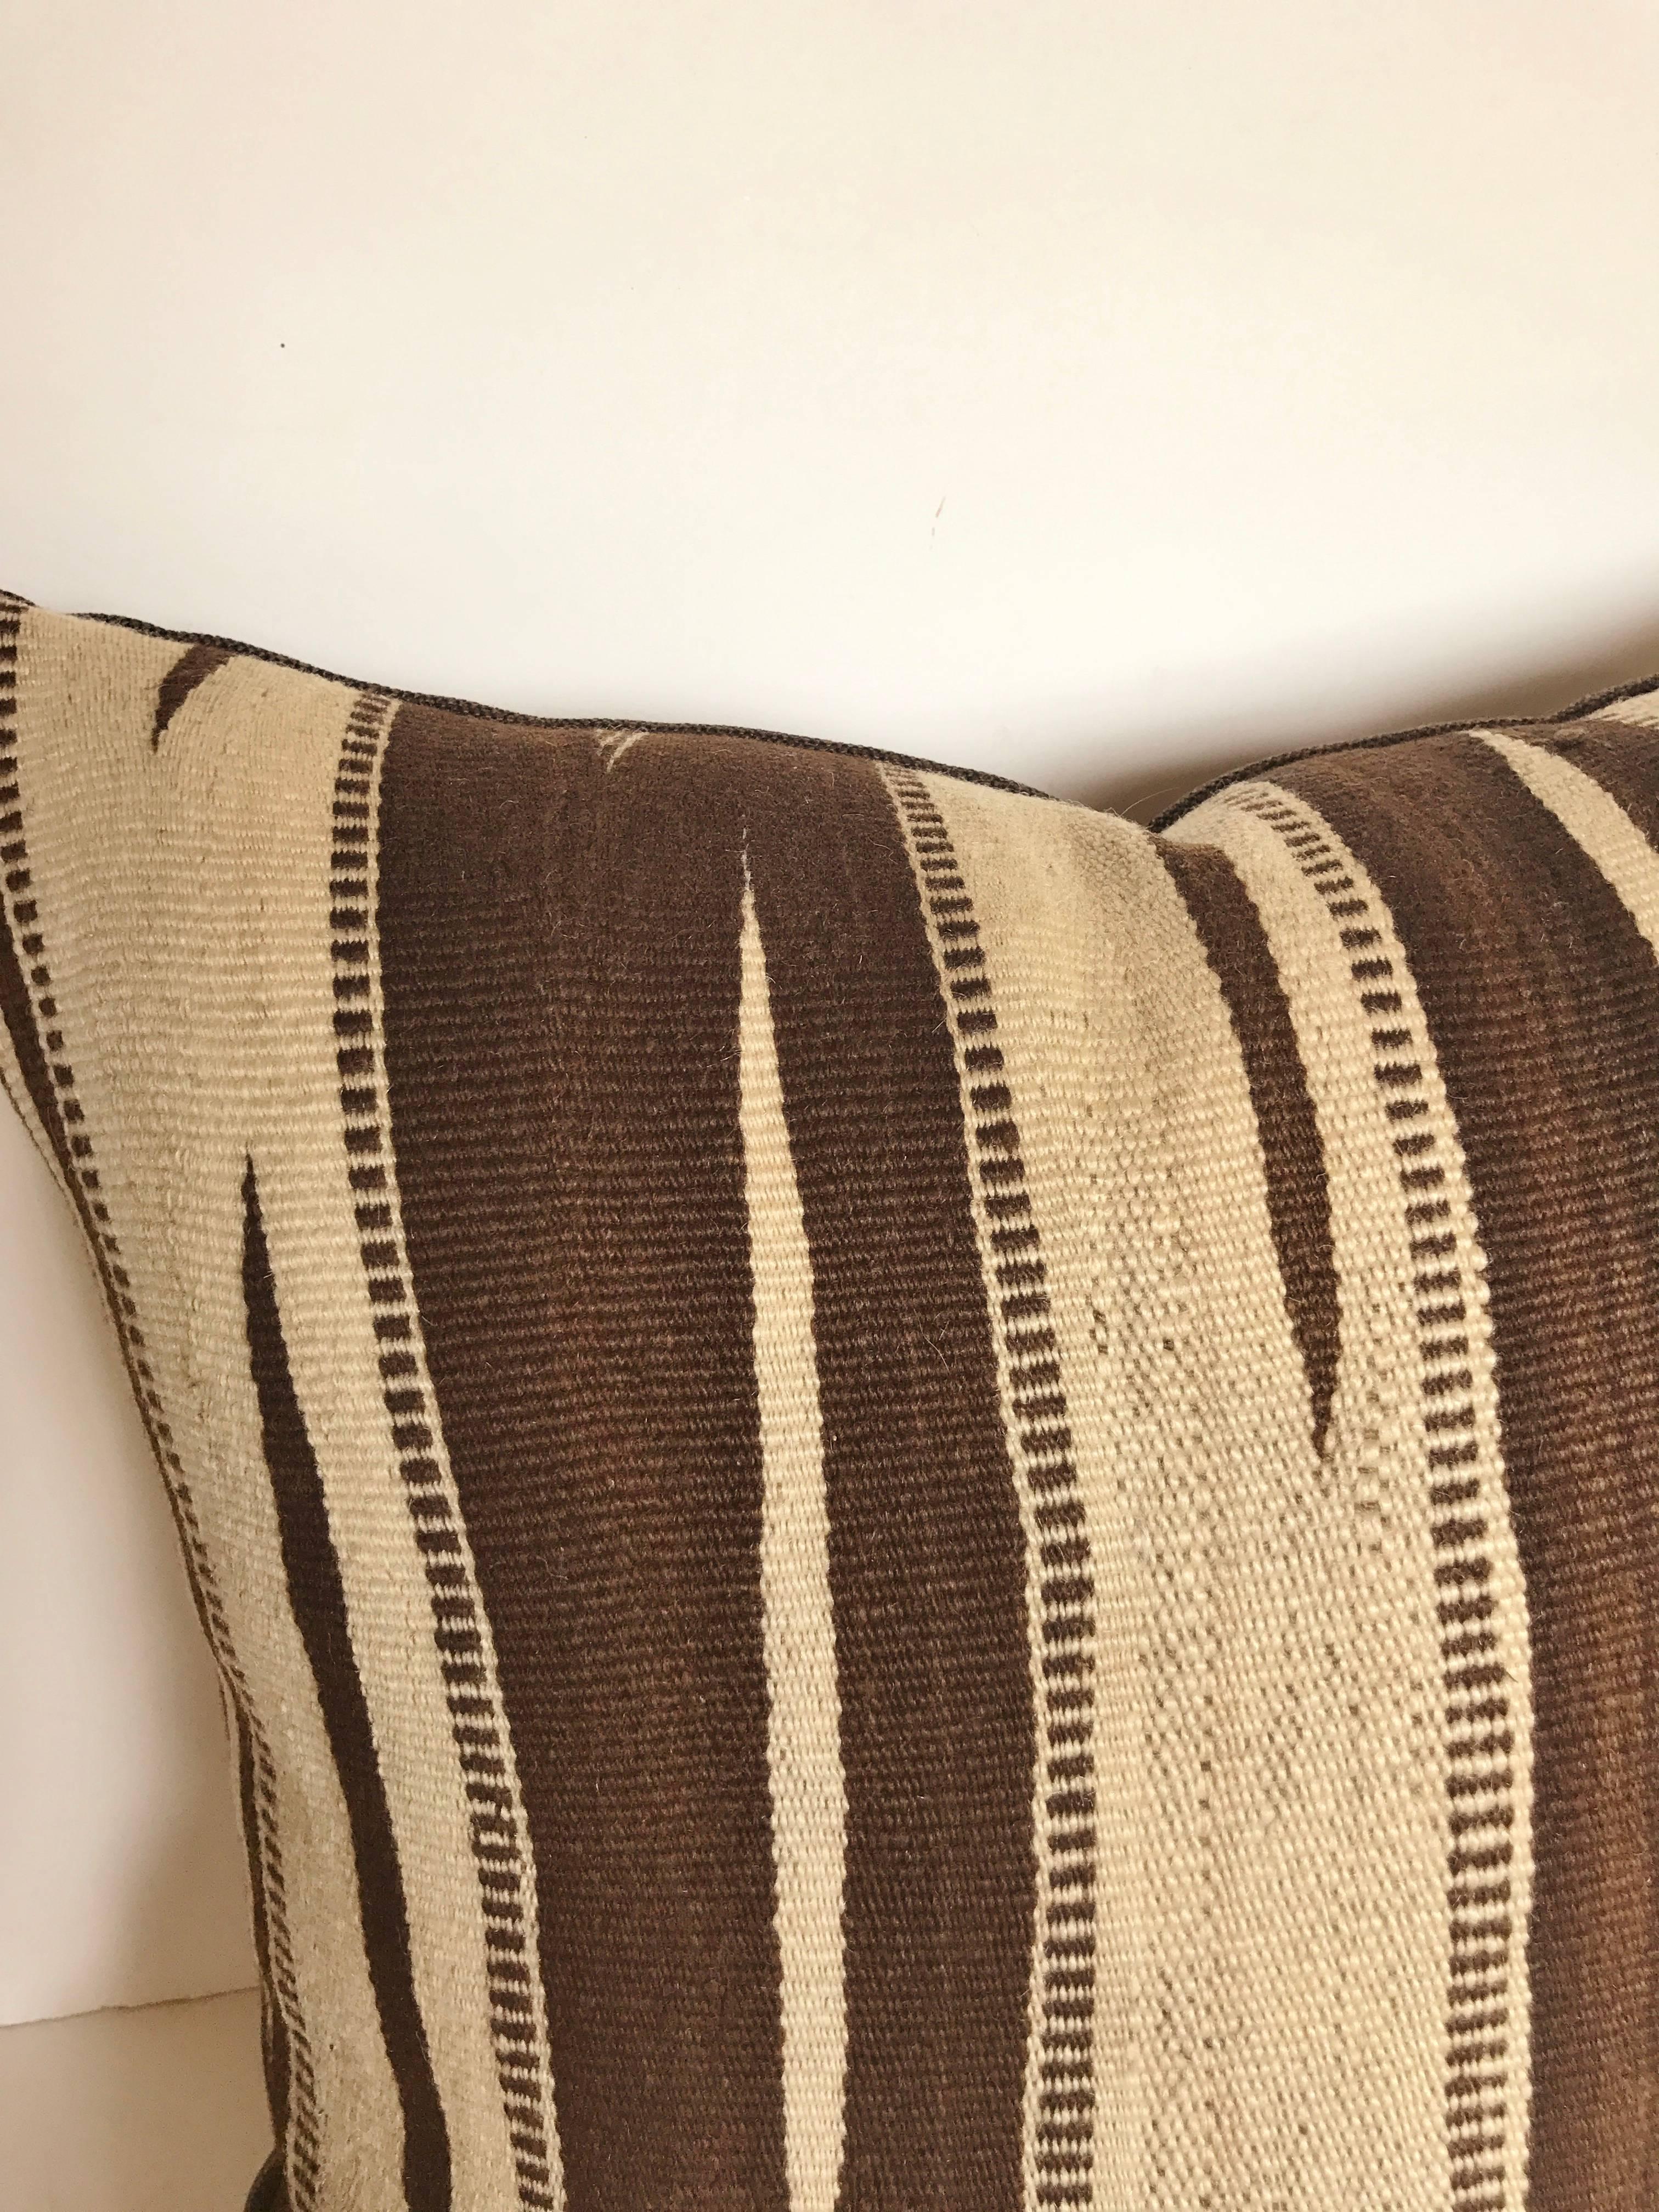 Hand-Woven Custom Moroccan Pillow Cut from a Vintage Hand Loomed Wool Ourika Kilim For Sale